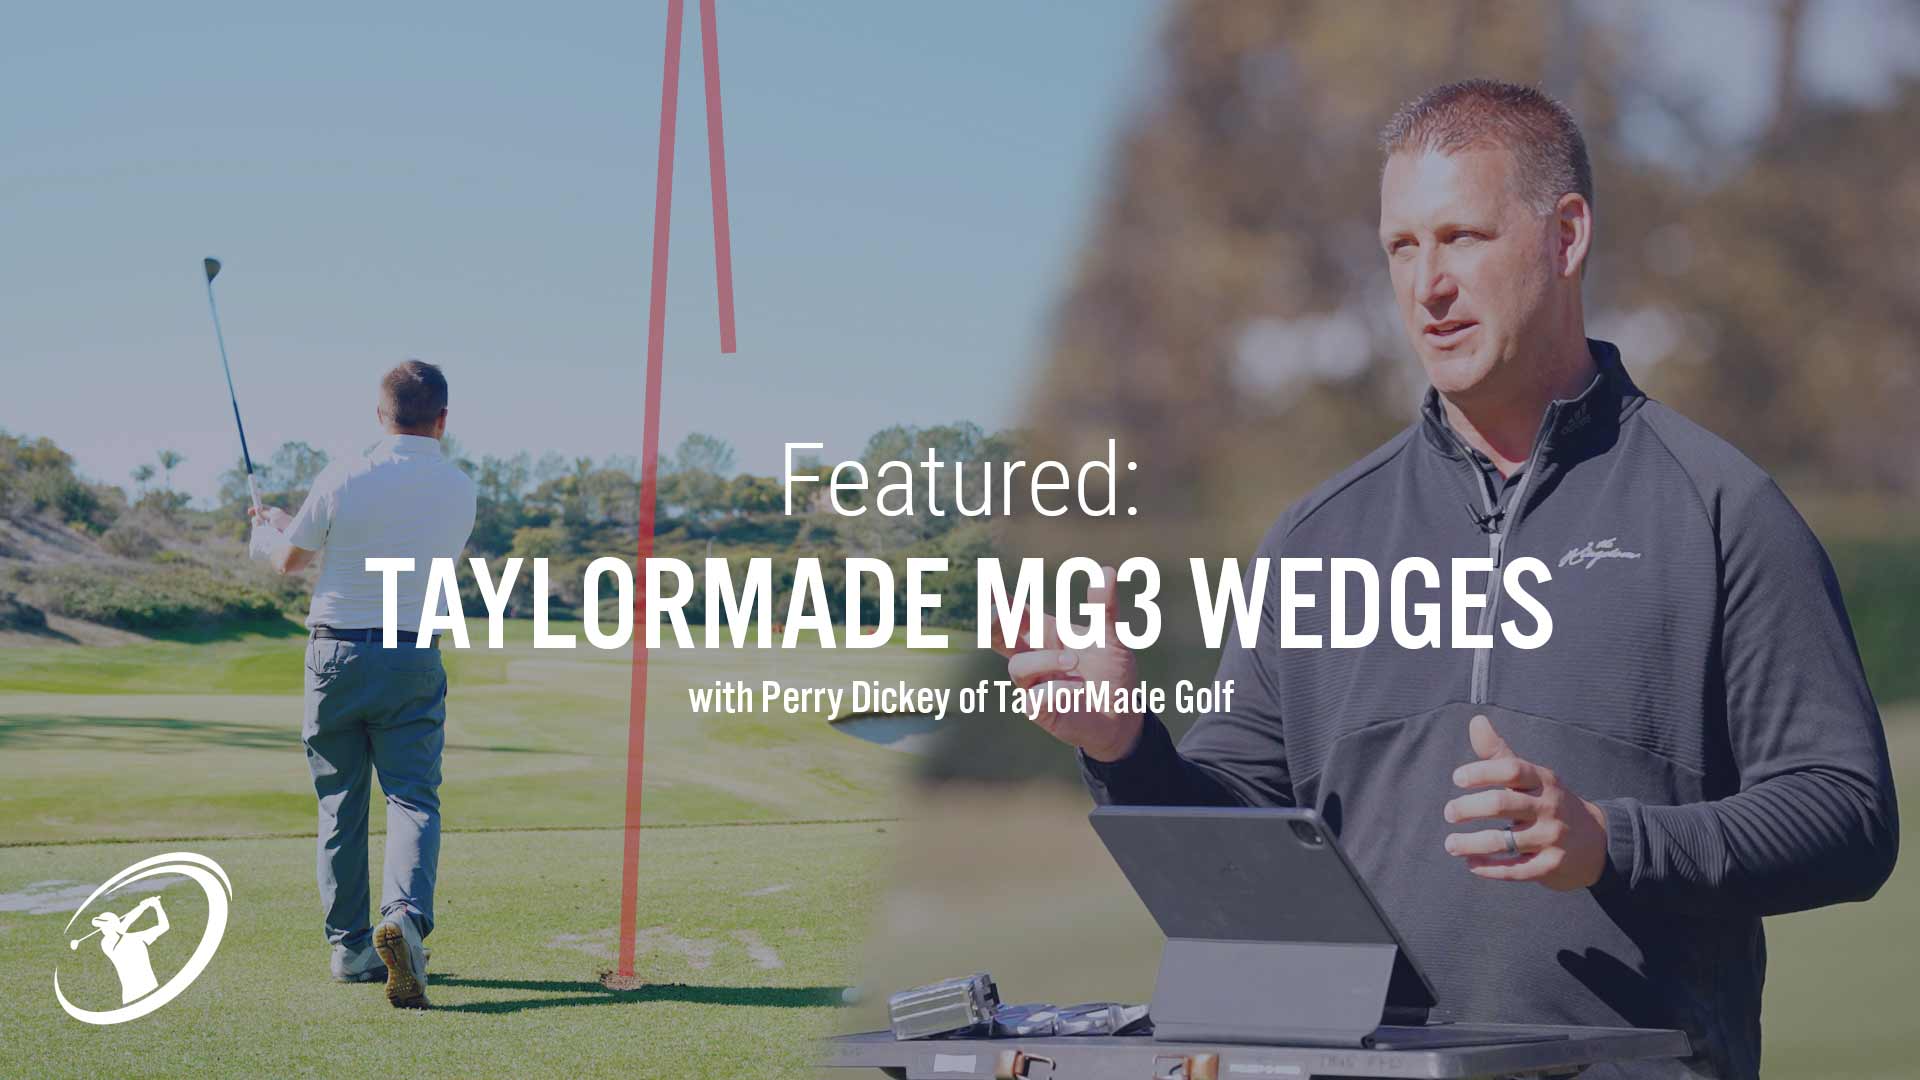 VIDEO: TaylorMade MG3 Wedge Fitting at the Kingdom